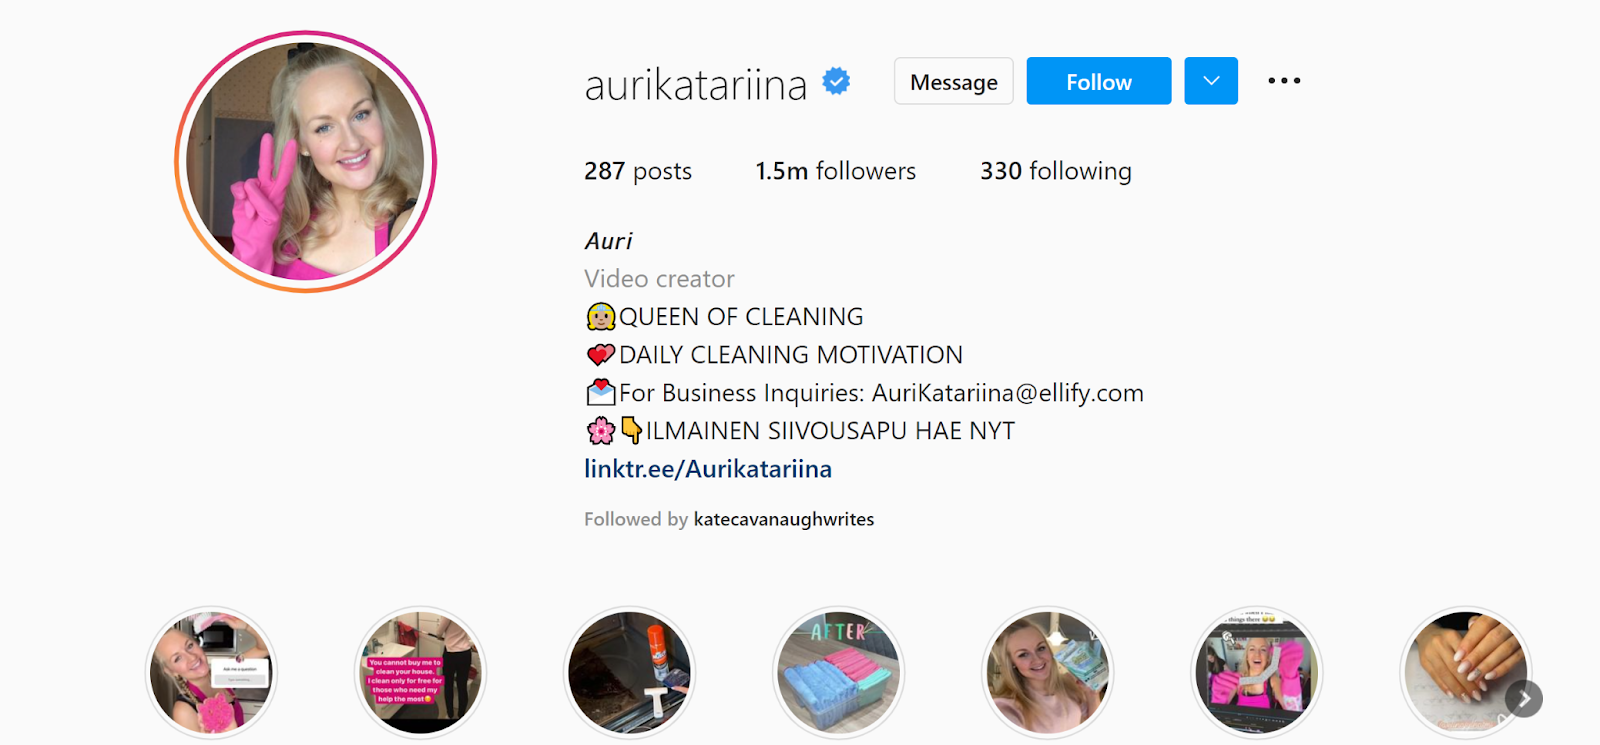 Auri Kananen of Aurikatariina on Becoming the Queen of Cleaning